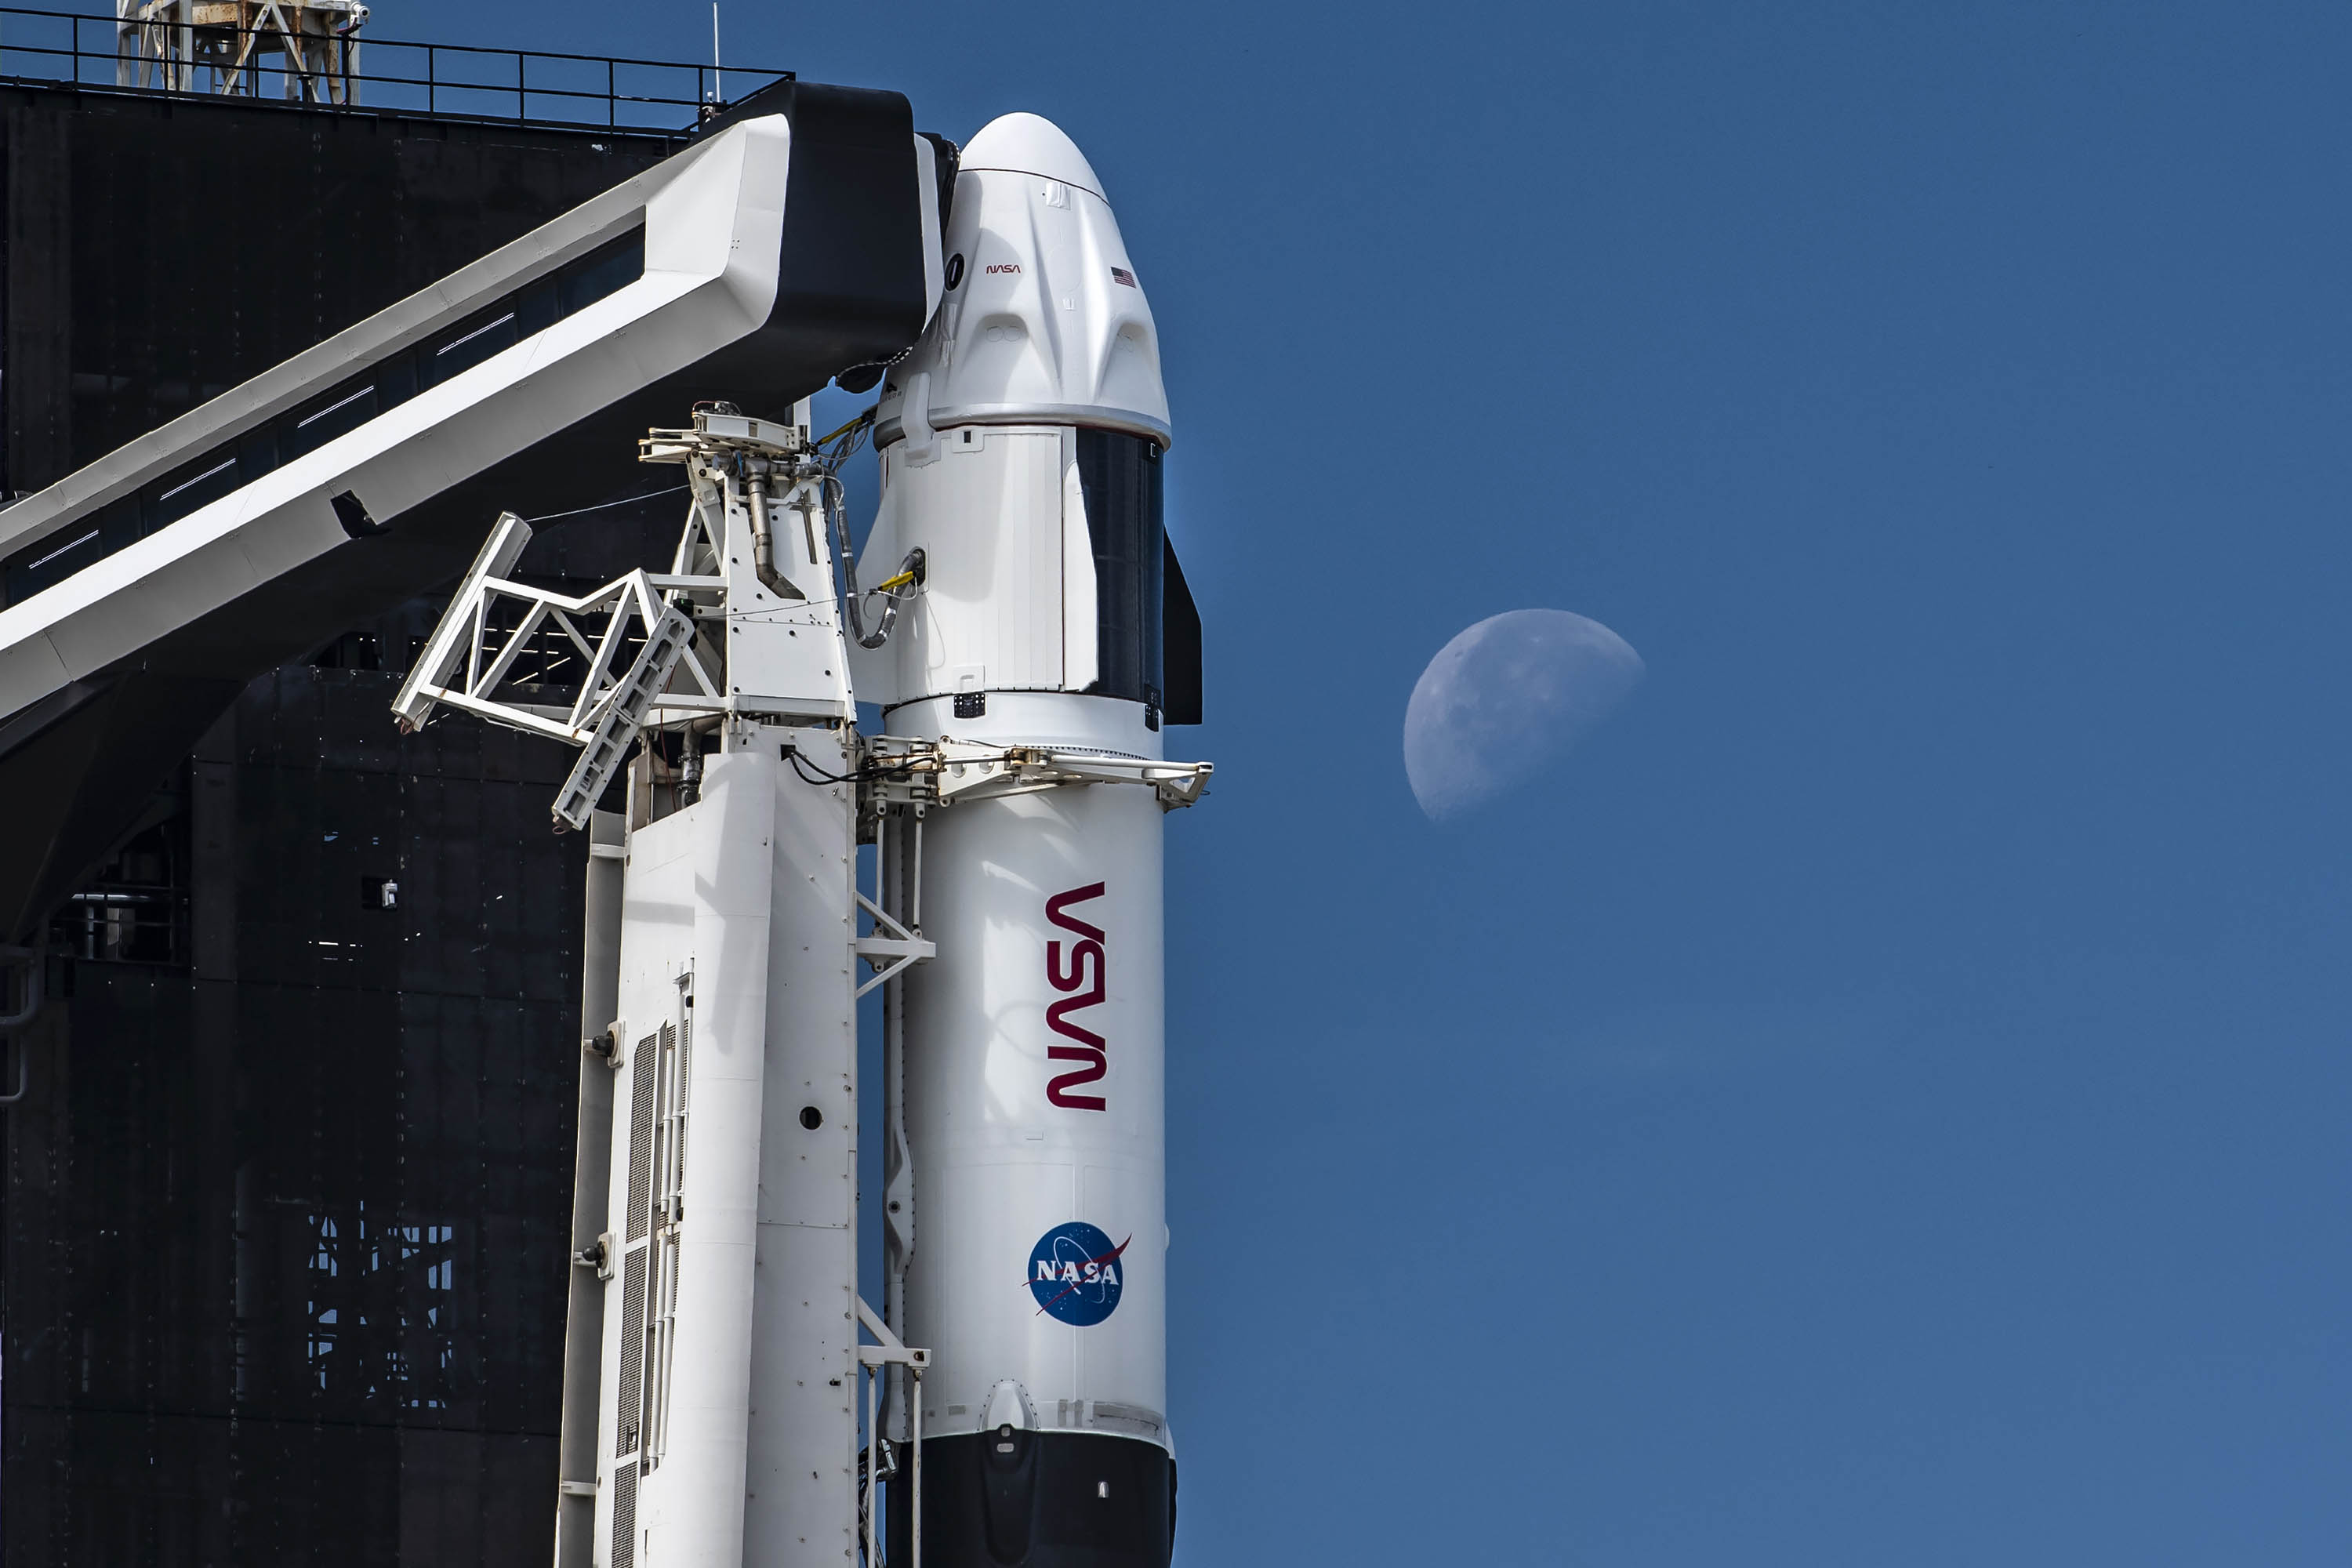 A Previously-Flown Falcon 9 Rocket Will Launch NASA's SpaceX Crew-3 Astronauts Aboard A New Crew Dragon